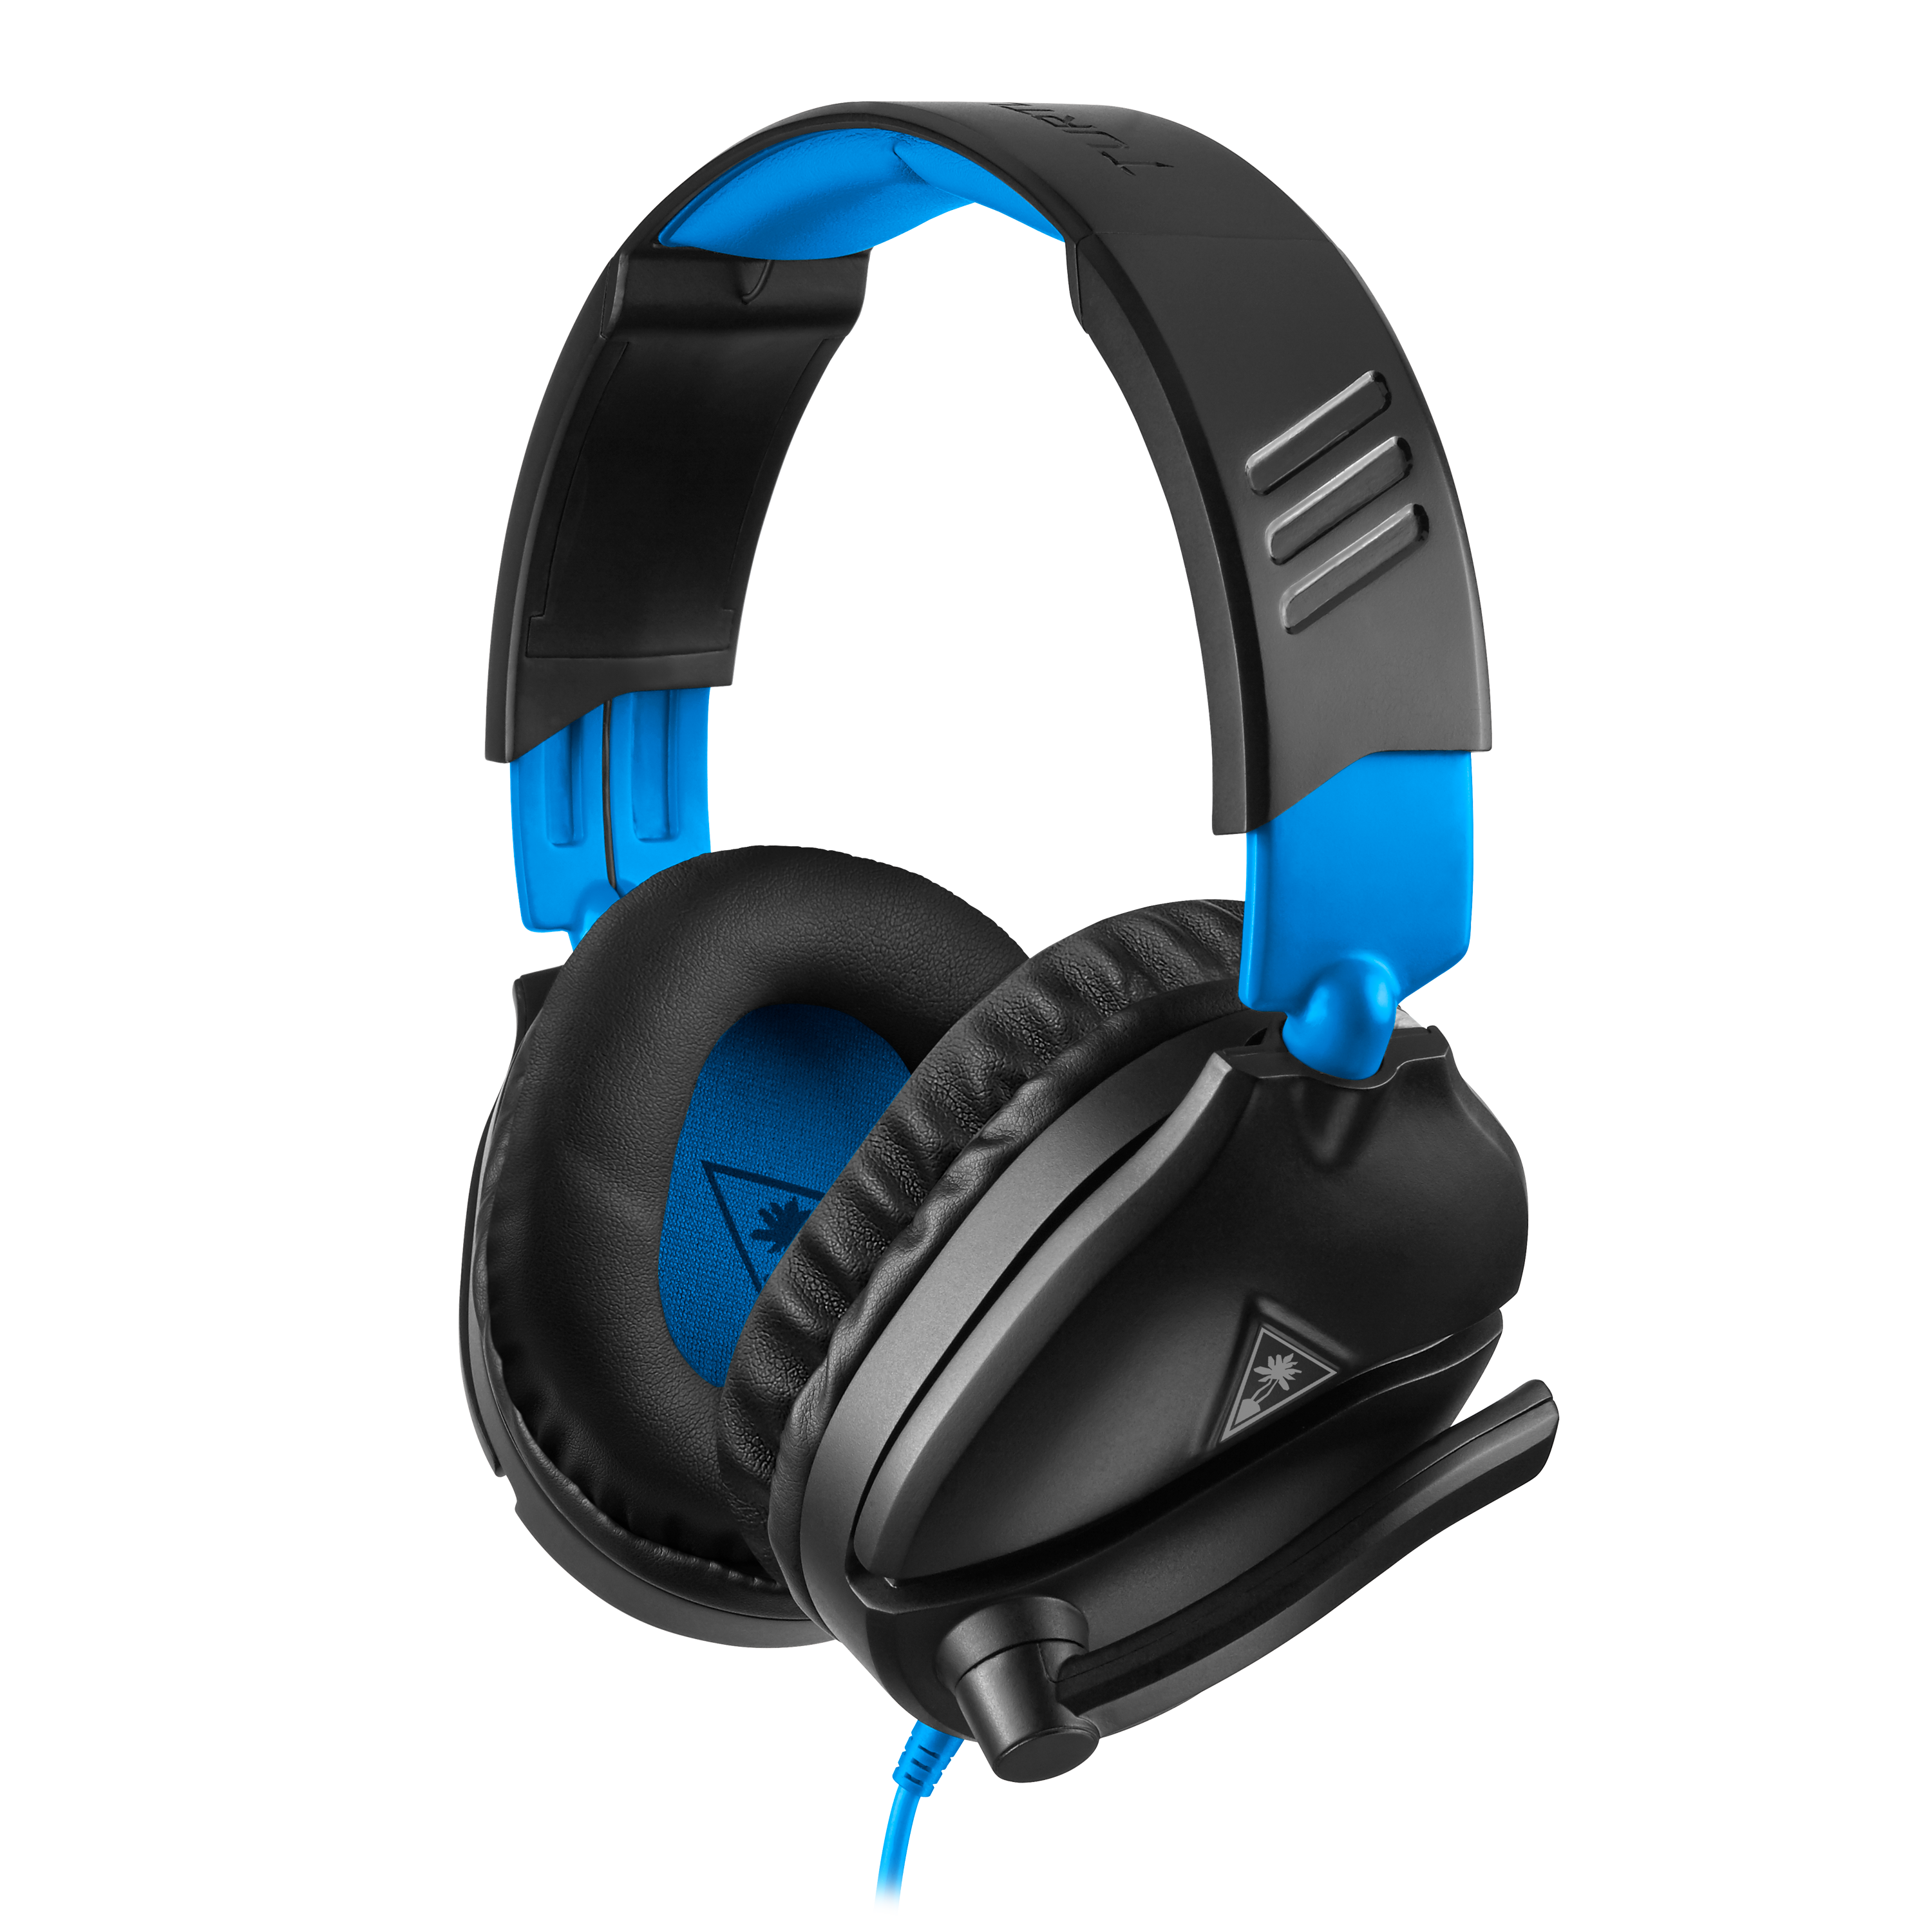 Recon 70 Gaming Headset For Ps4 Turtle Beach